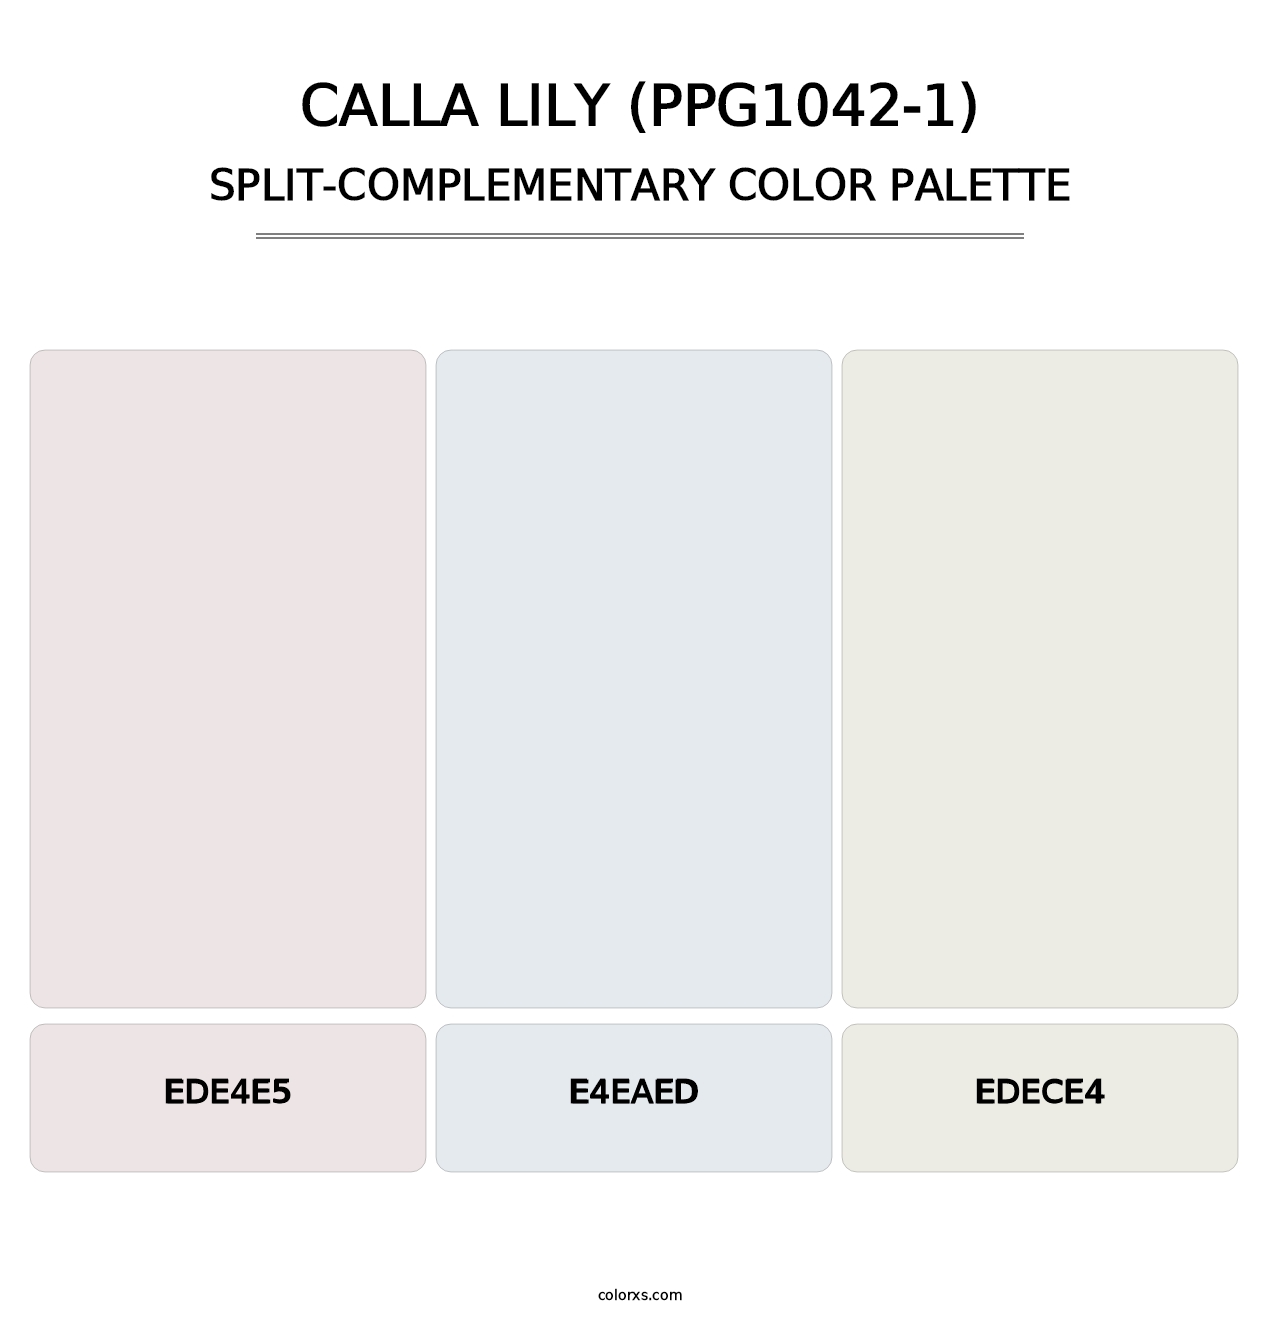 Calla Lily (PPG1042-1) - Split-Complementary Color Palette